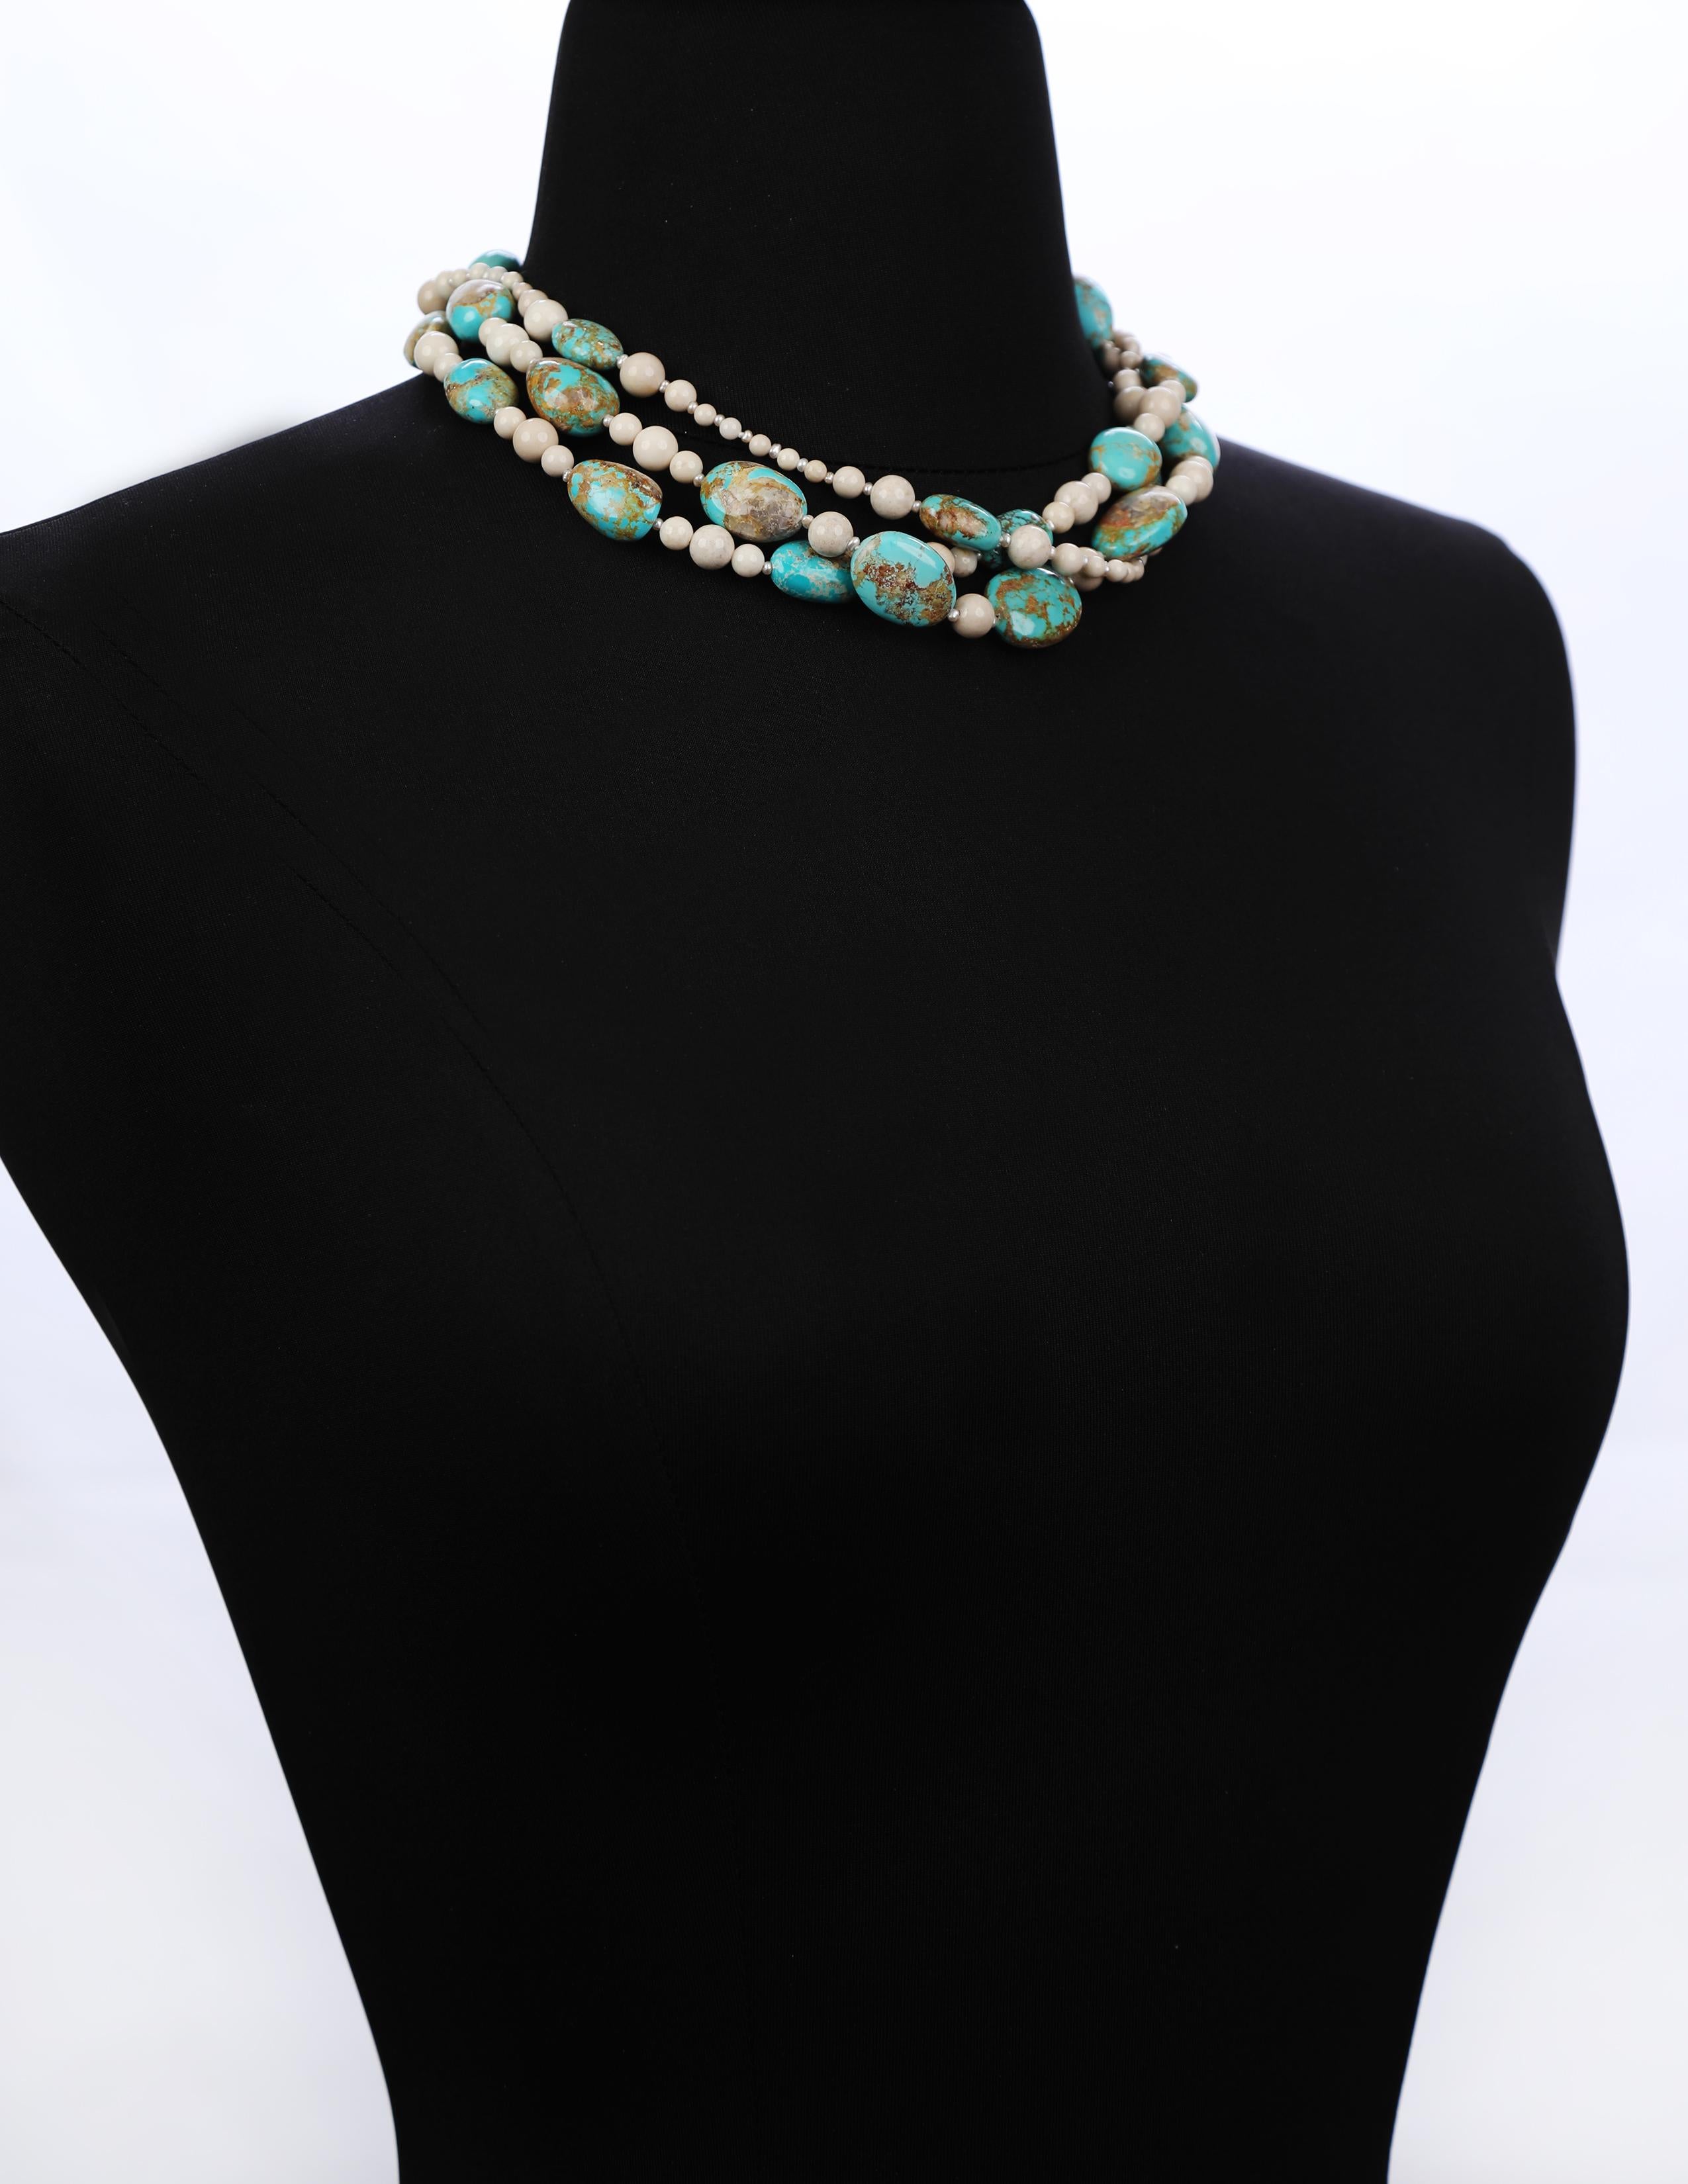 Bead Multi-Strand Necklace: Peruvian Opal, Jasper, Pearl, and Gold For Sale